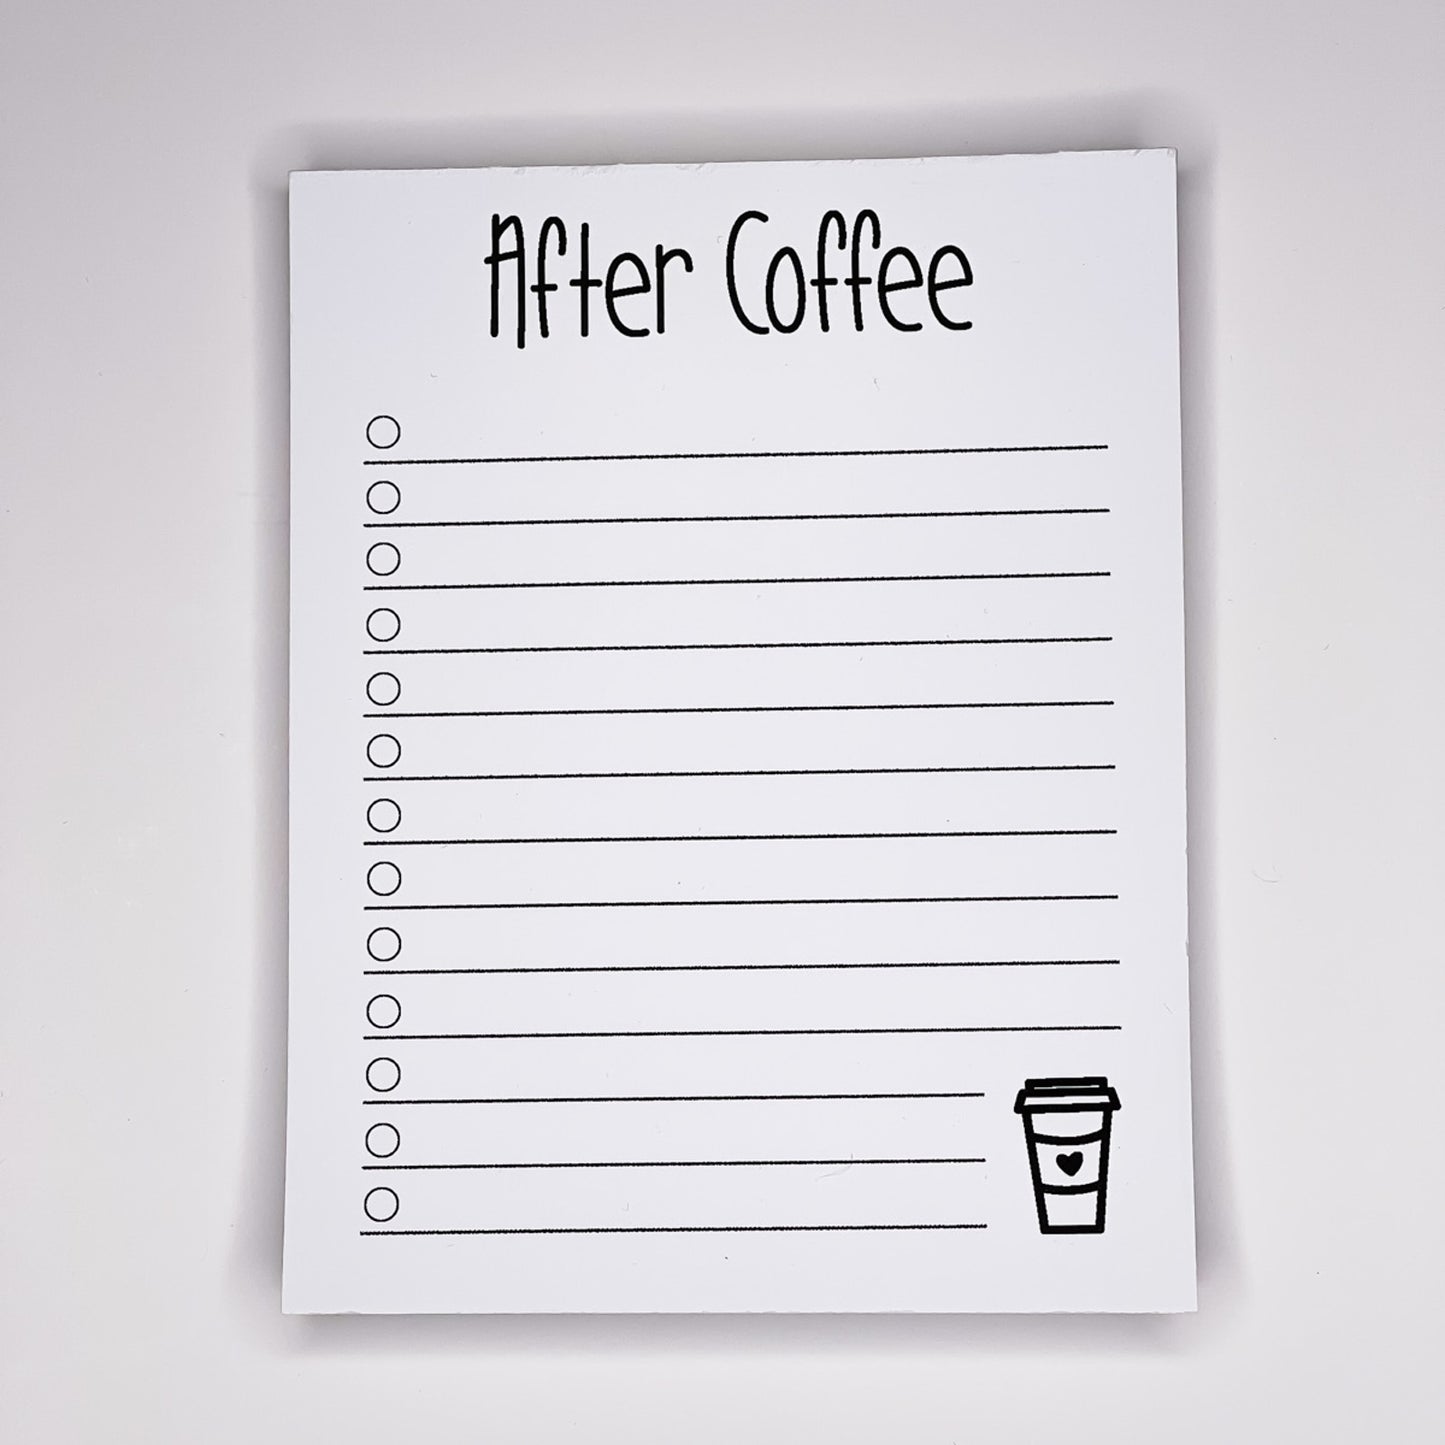 After Coffee List - Notepad